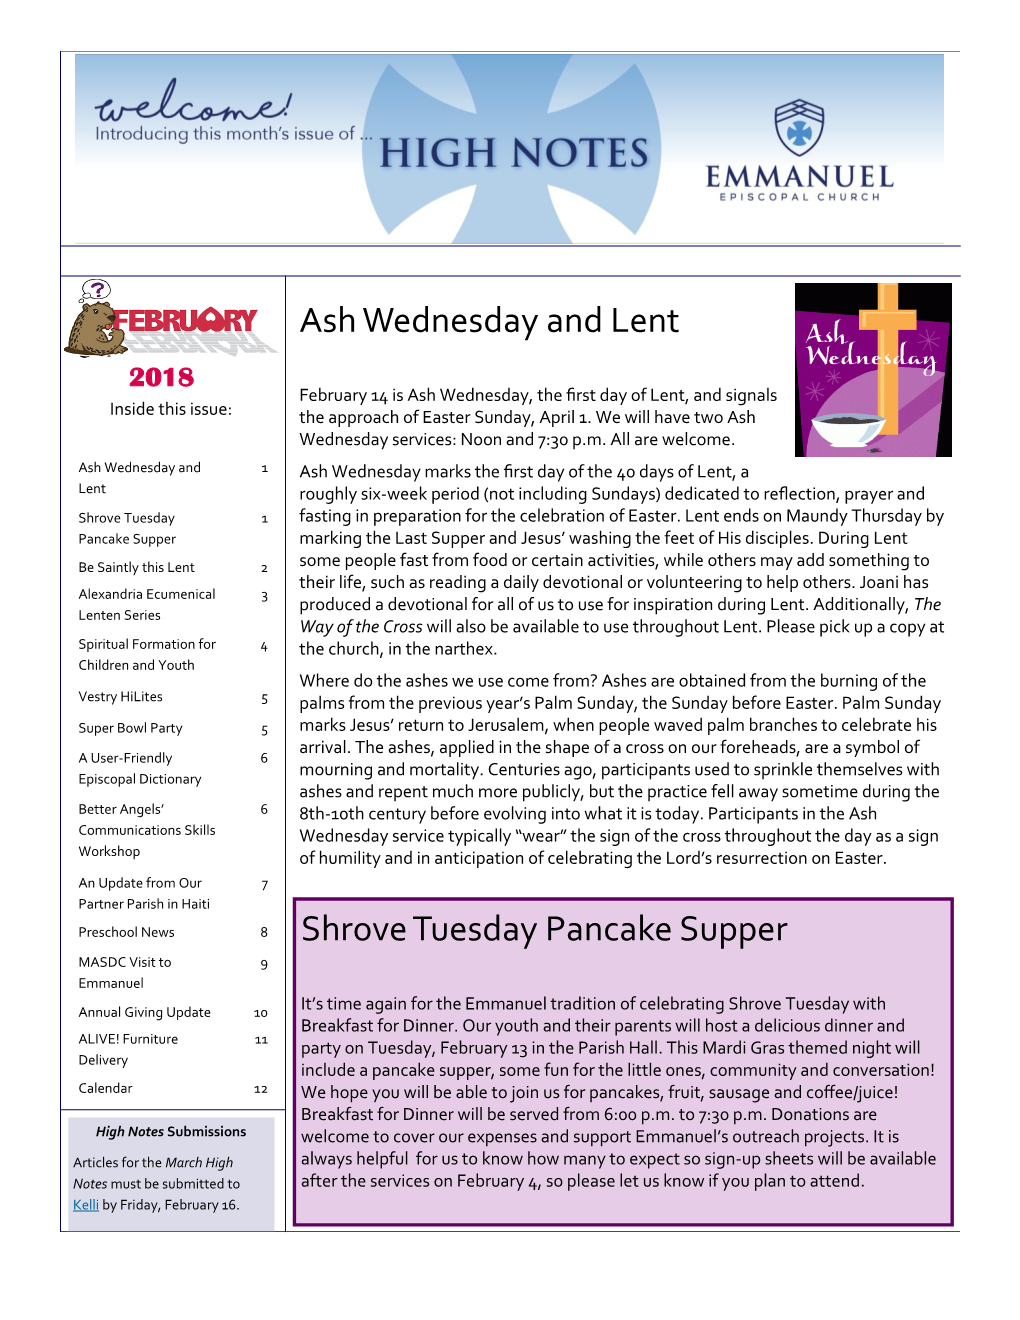 Ash Wednesday and Lent Shrove Tuesday Pancake Supper